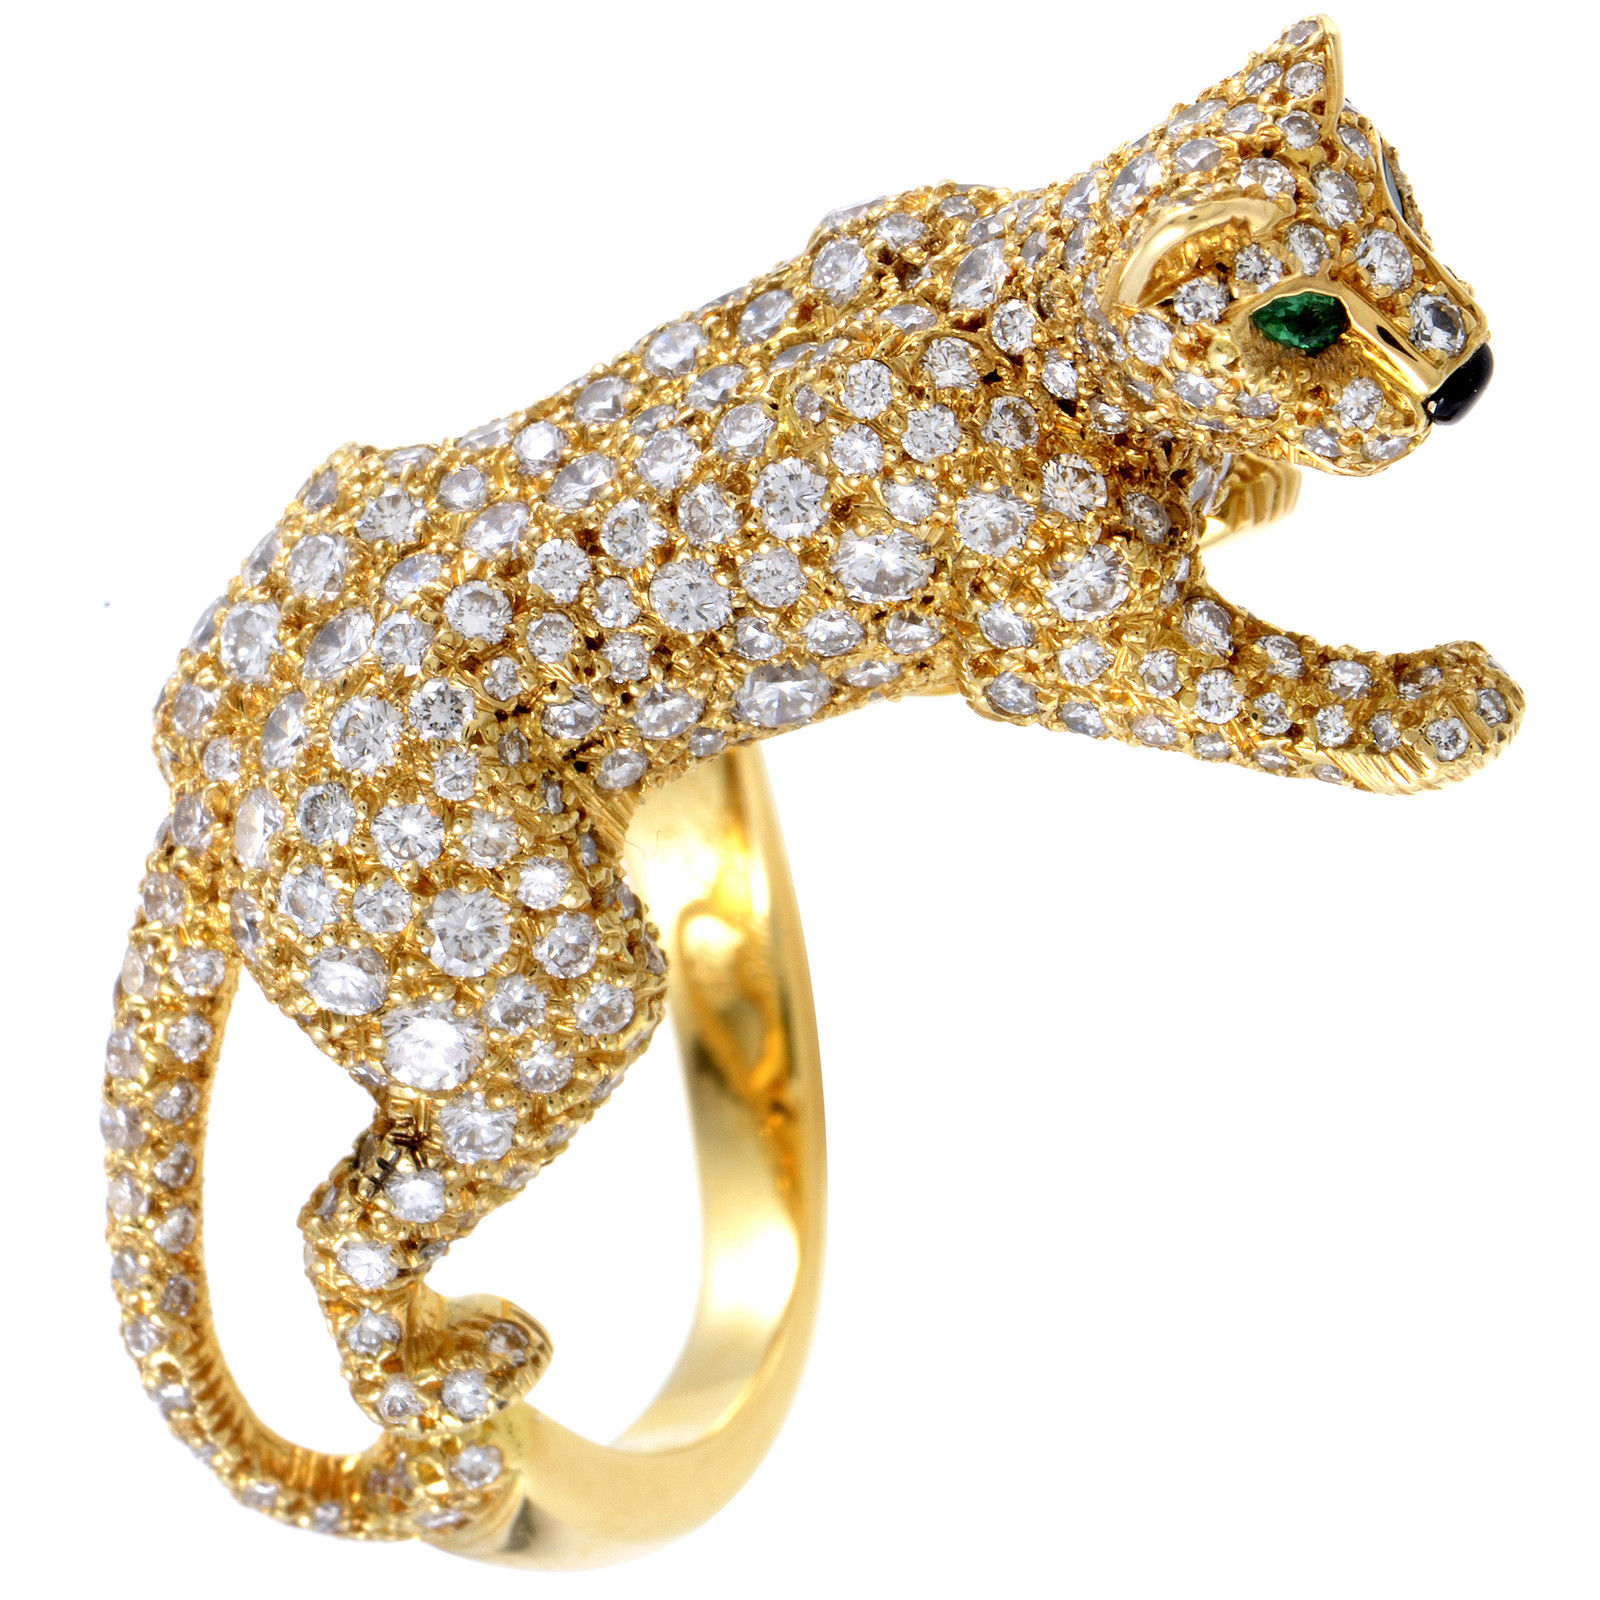 Cartier Panthere Women's 18K Yellow Gold Full Diamond Pave Ring